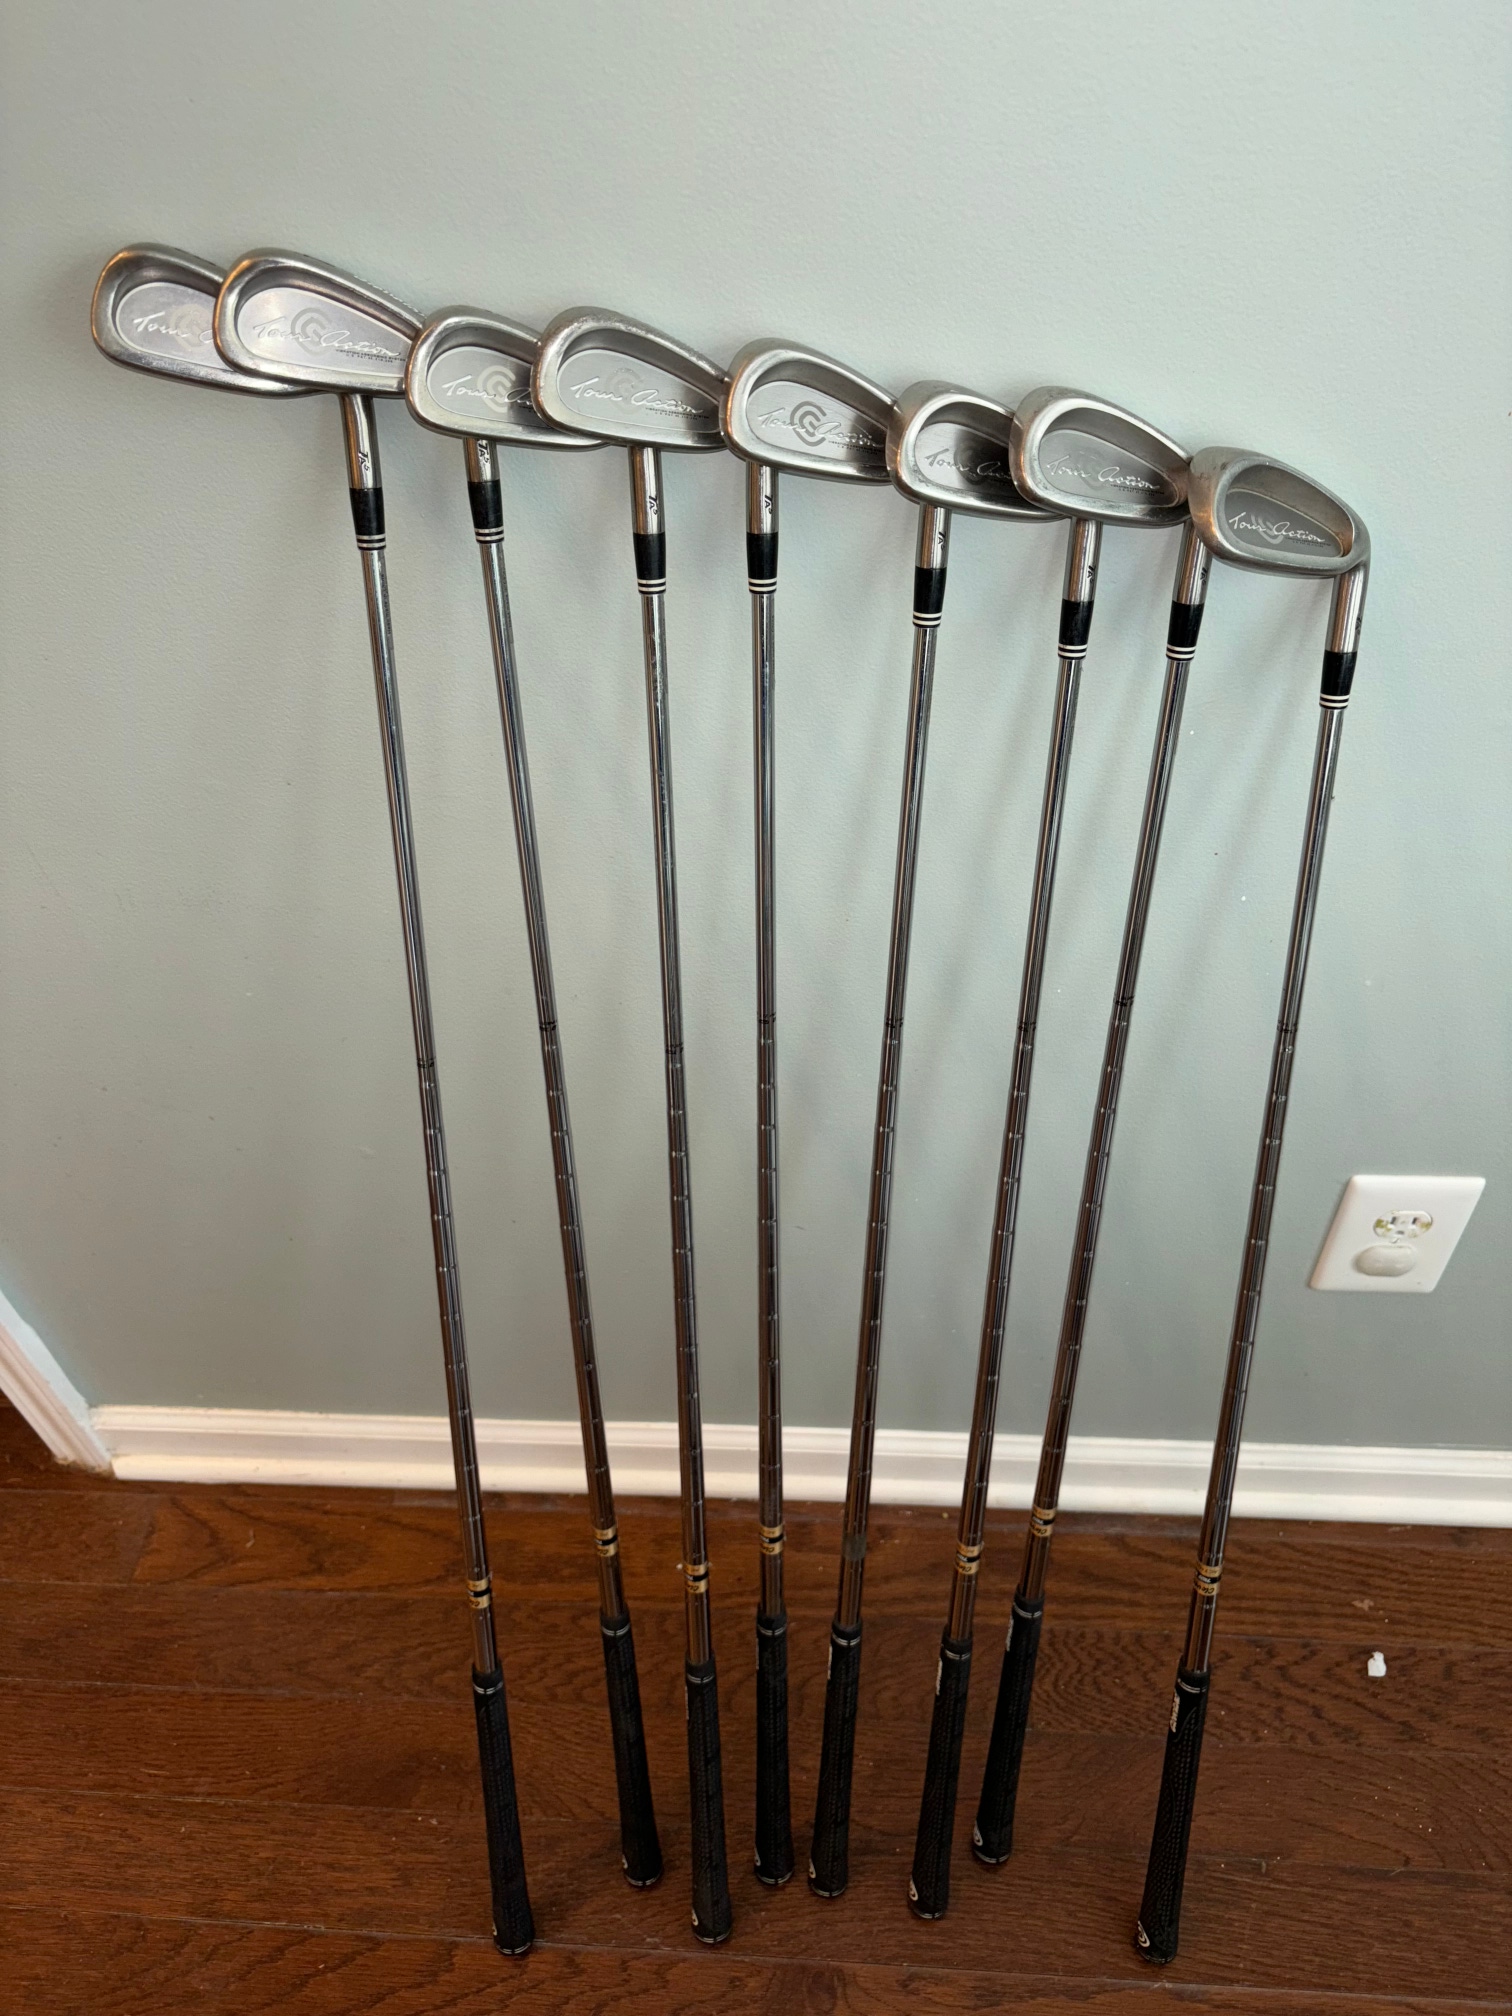 Men's Used Cleveland Right Handed TA5 Iron Actionlite Set Stiff Flex 3-PW 8 Pieces Steel Shaft